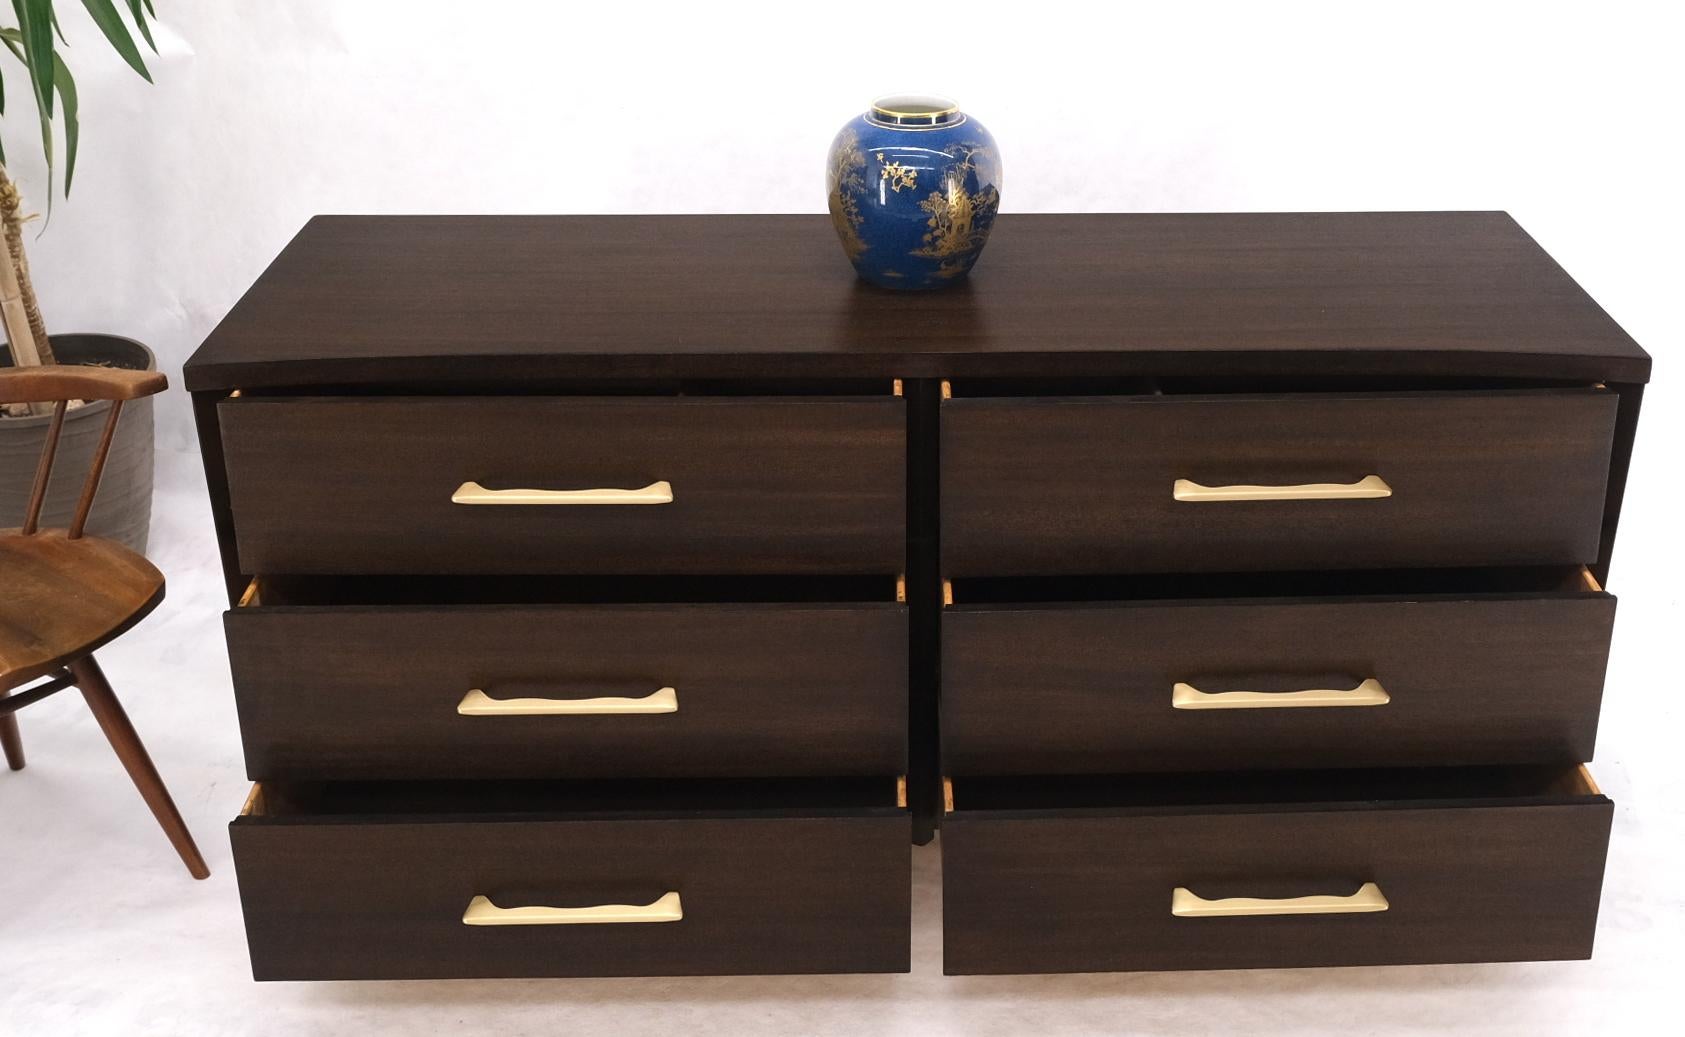 Concave Front Sculptural Profile Large Pulls 6 Drawers Restored Espresso Dresser In Excellent Condition For Sale In Rockaway, NJ